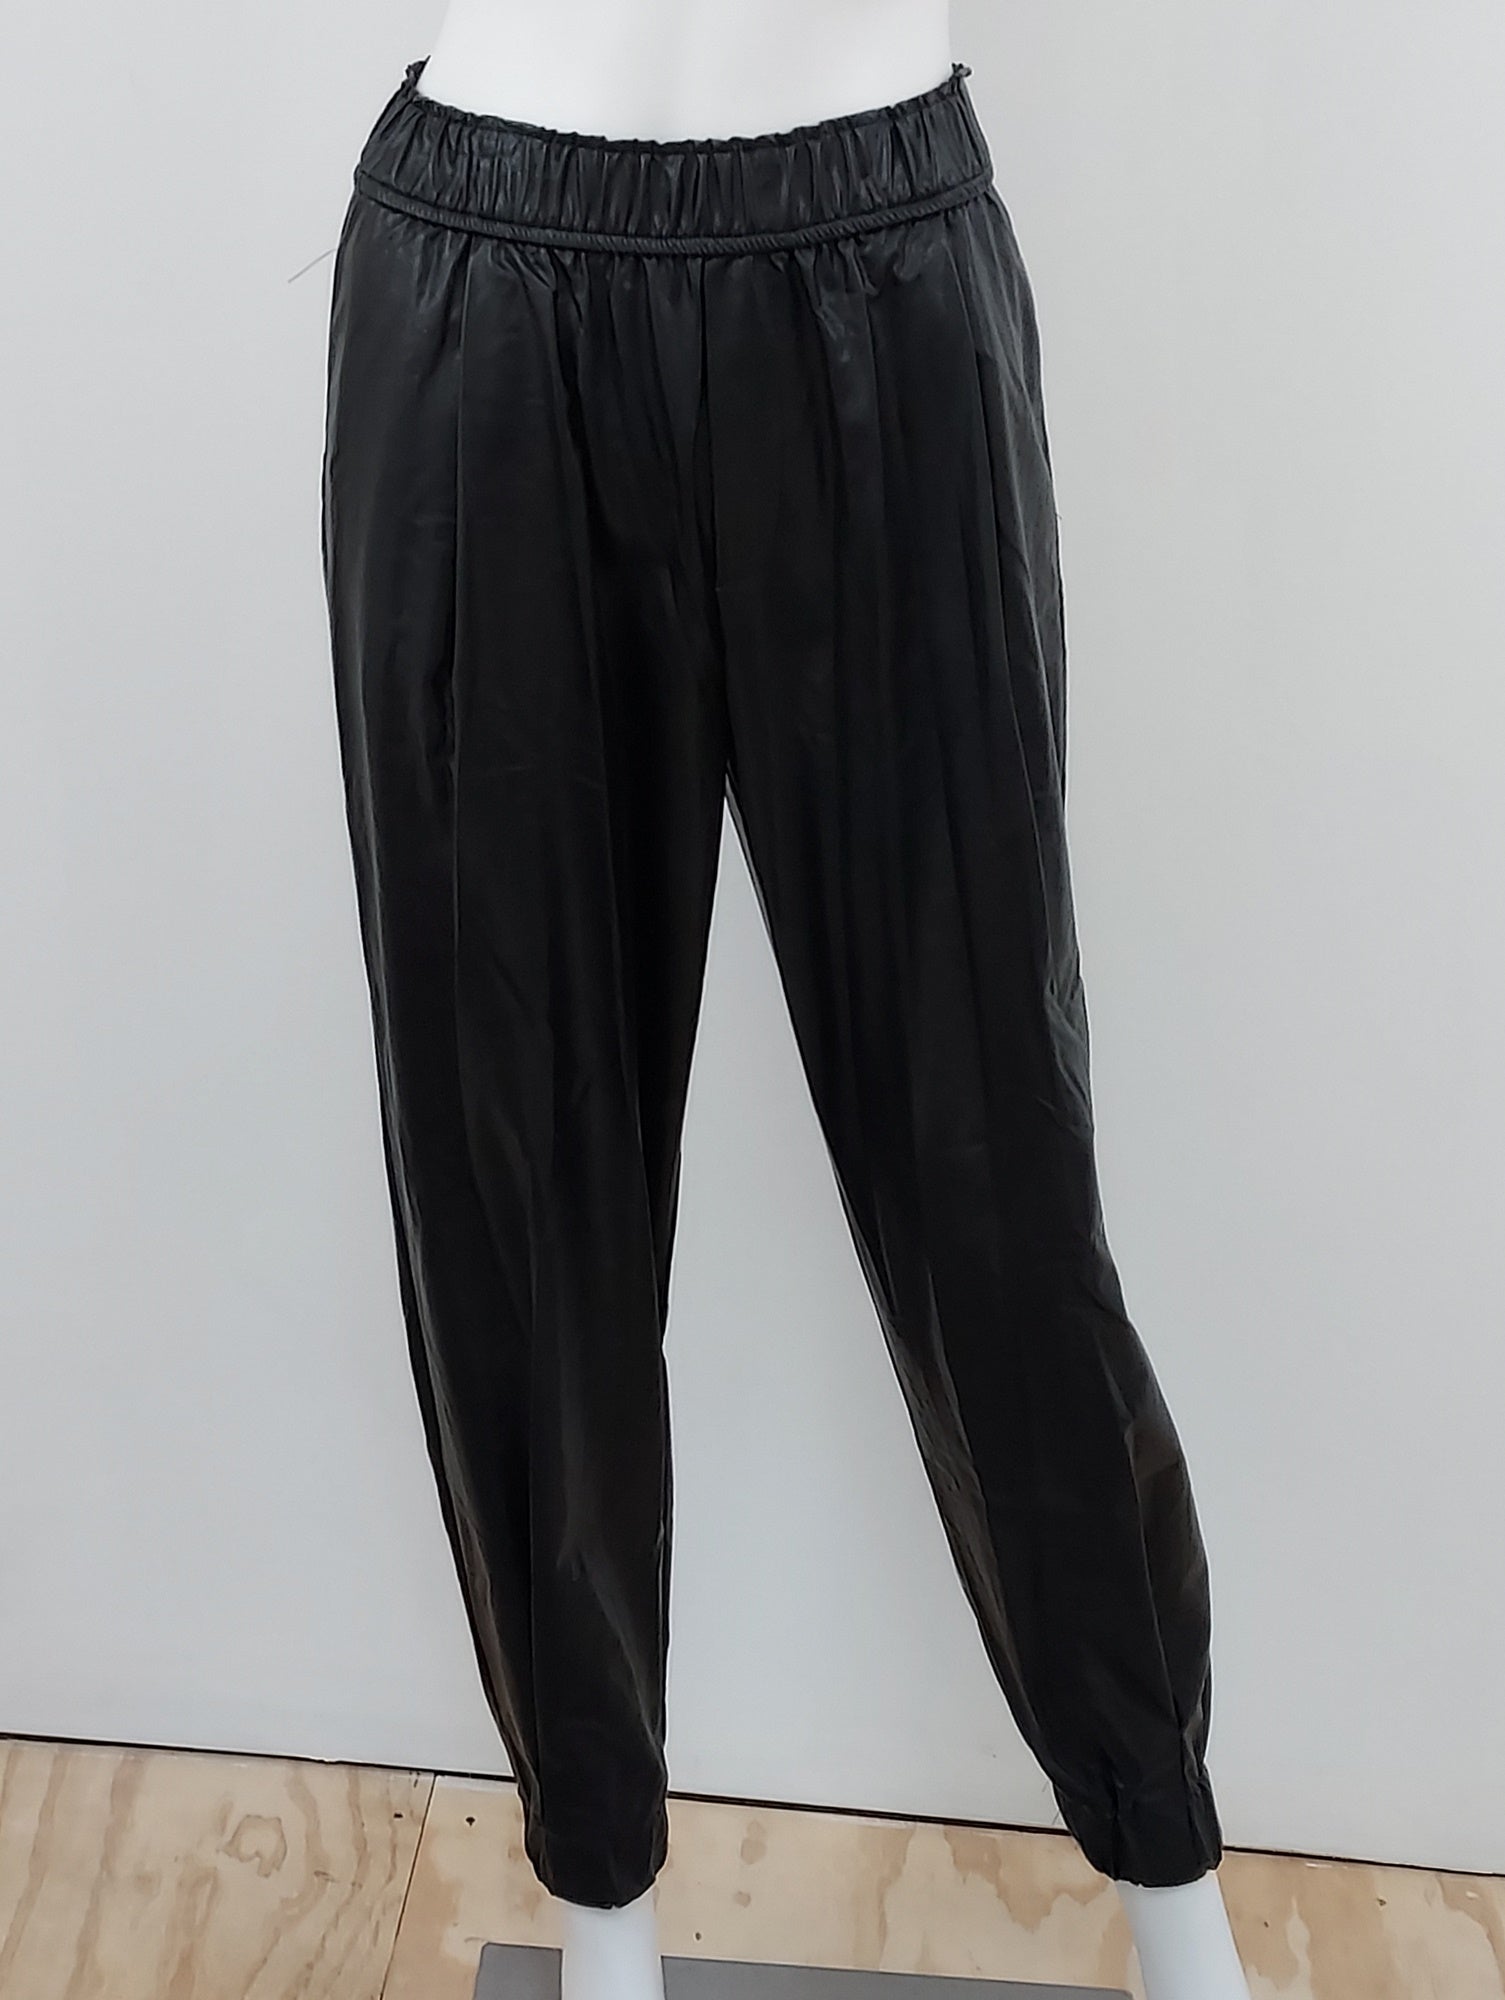 Vegan Leather Joggers Size Small